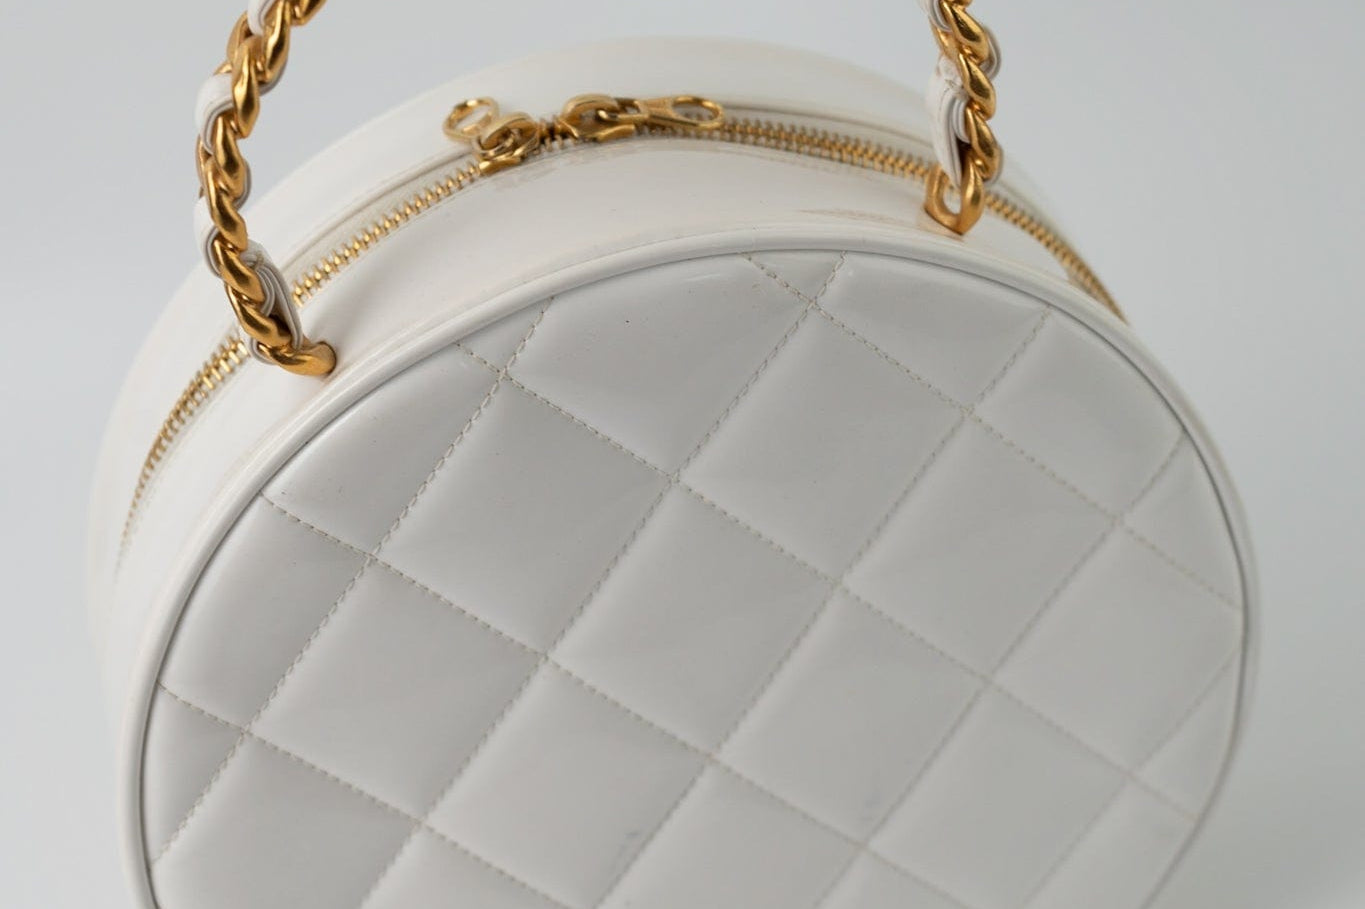 CHANEL Cosmetic Cases Vintage White Patent Leather Round Vanity Bag Gold Hardware - Redeluxe